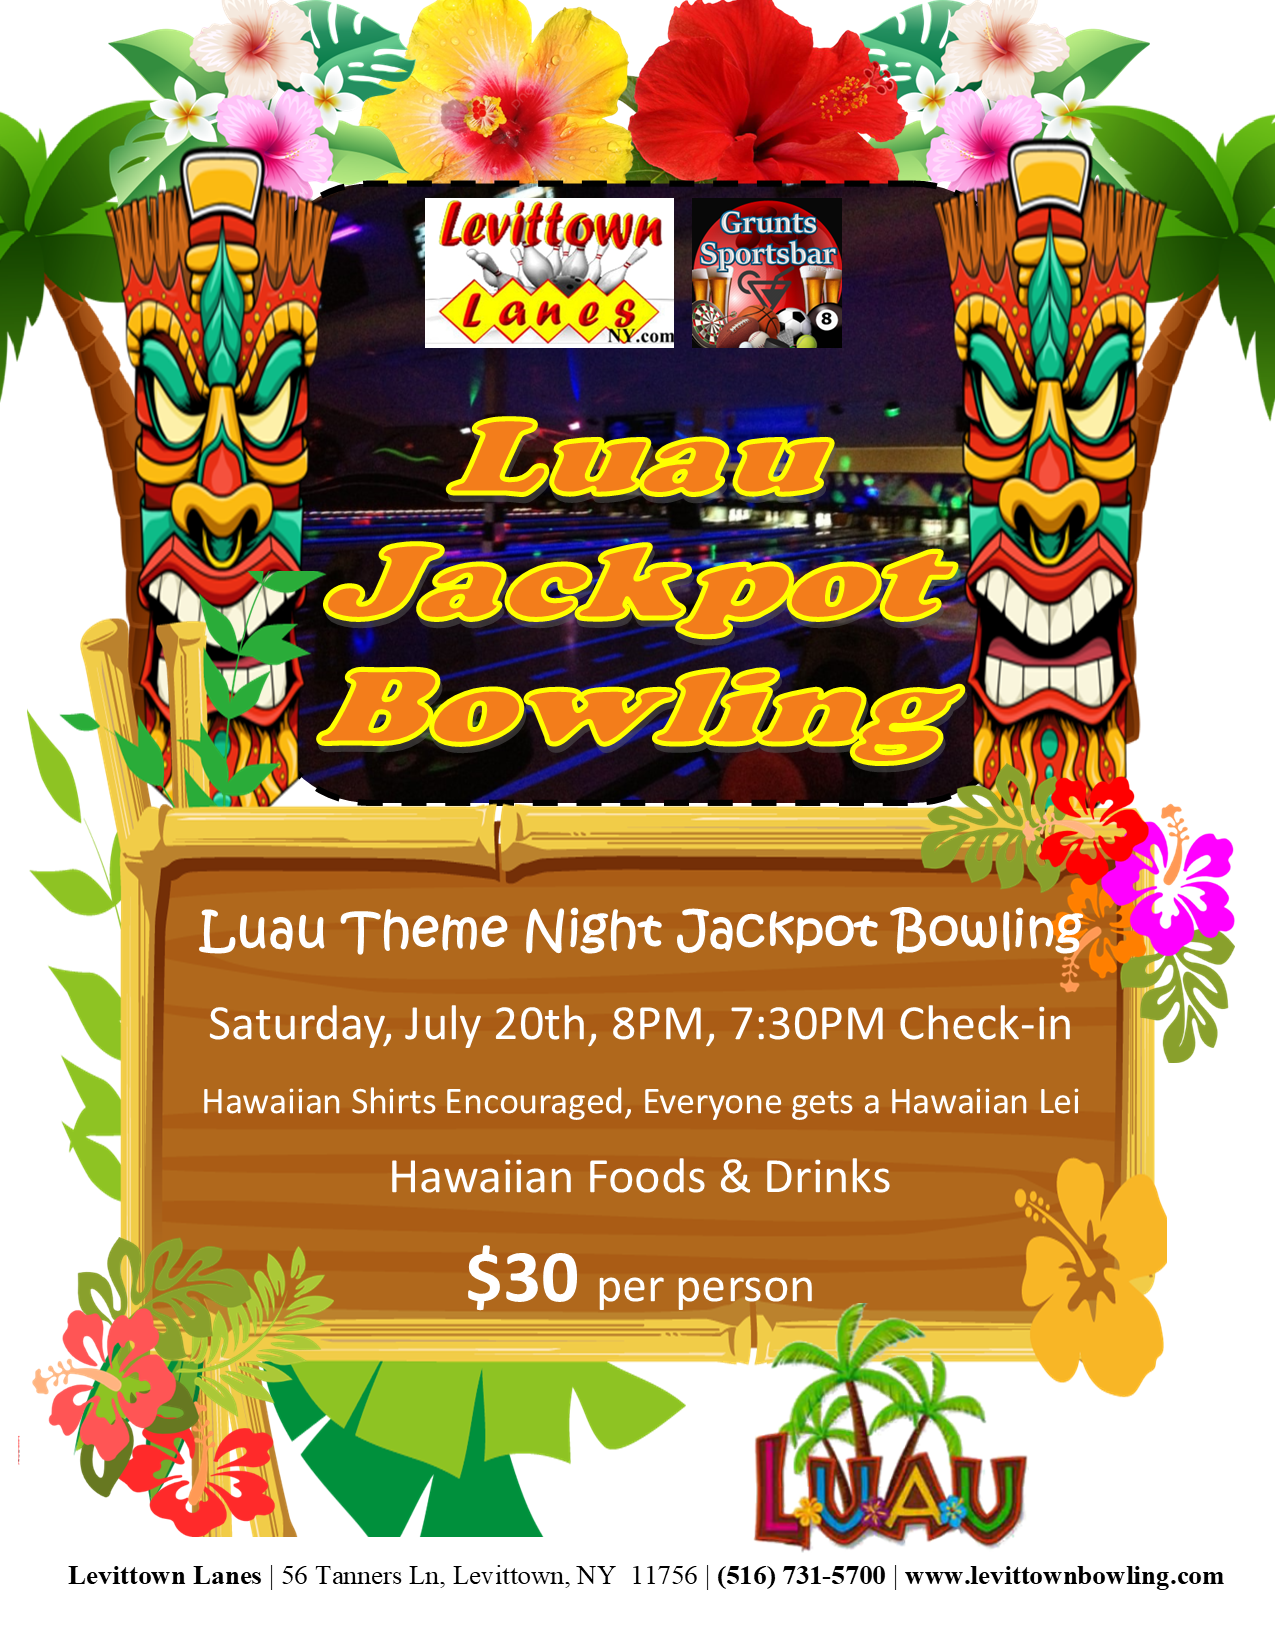 Join us for Jackpot Bowling - Luau Style! - July 20th, at 8:00PM